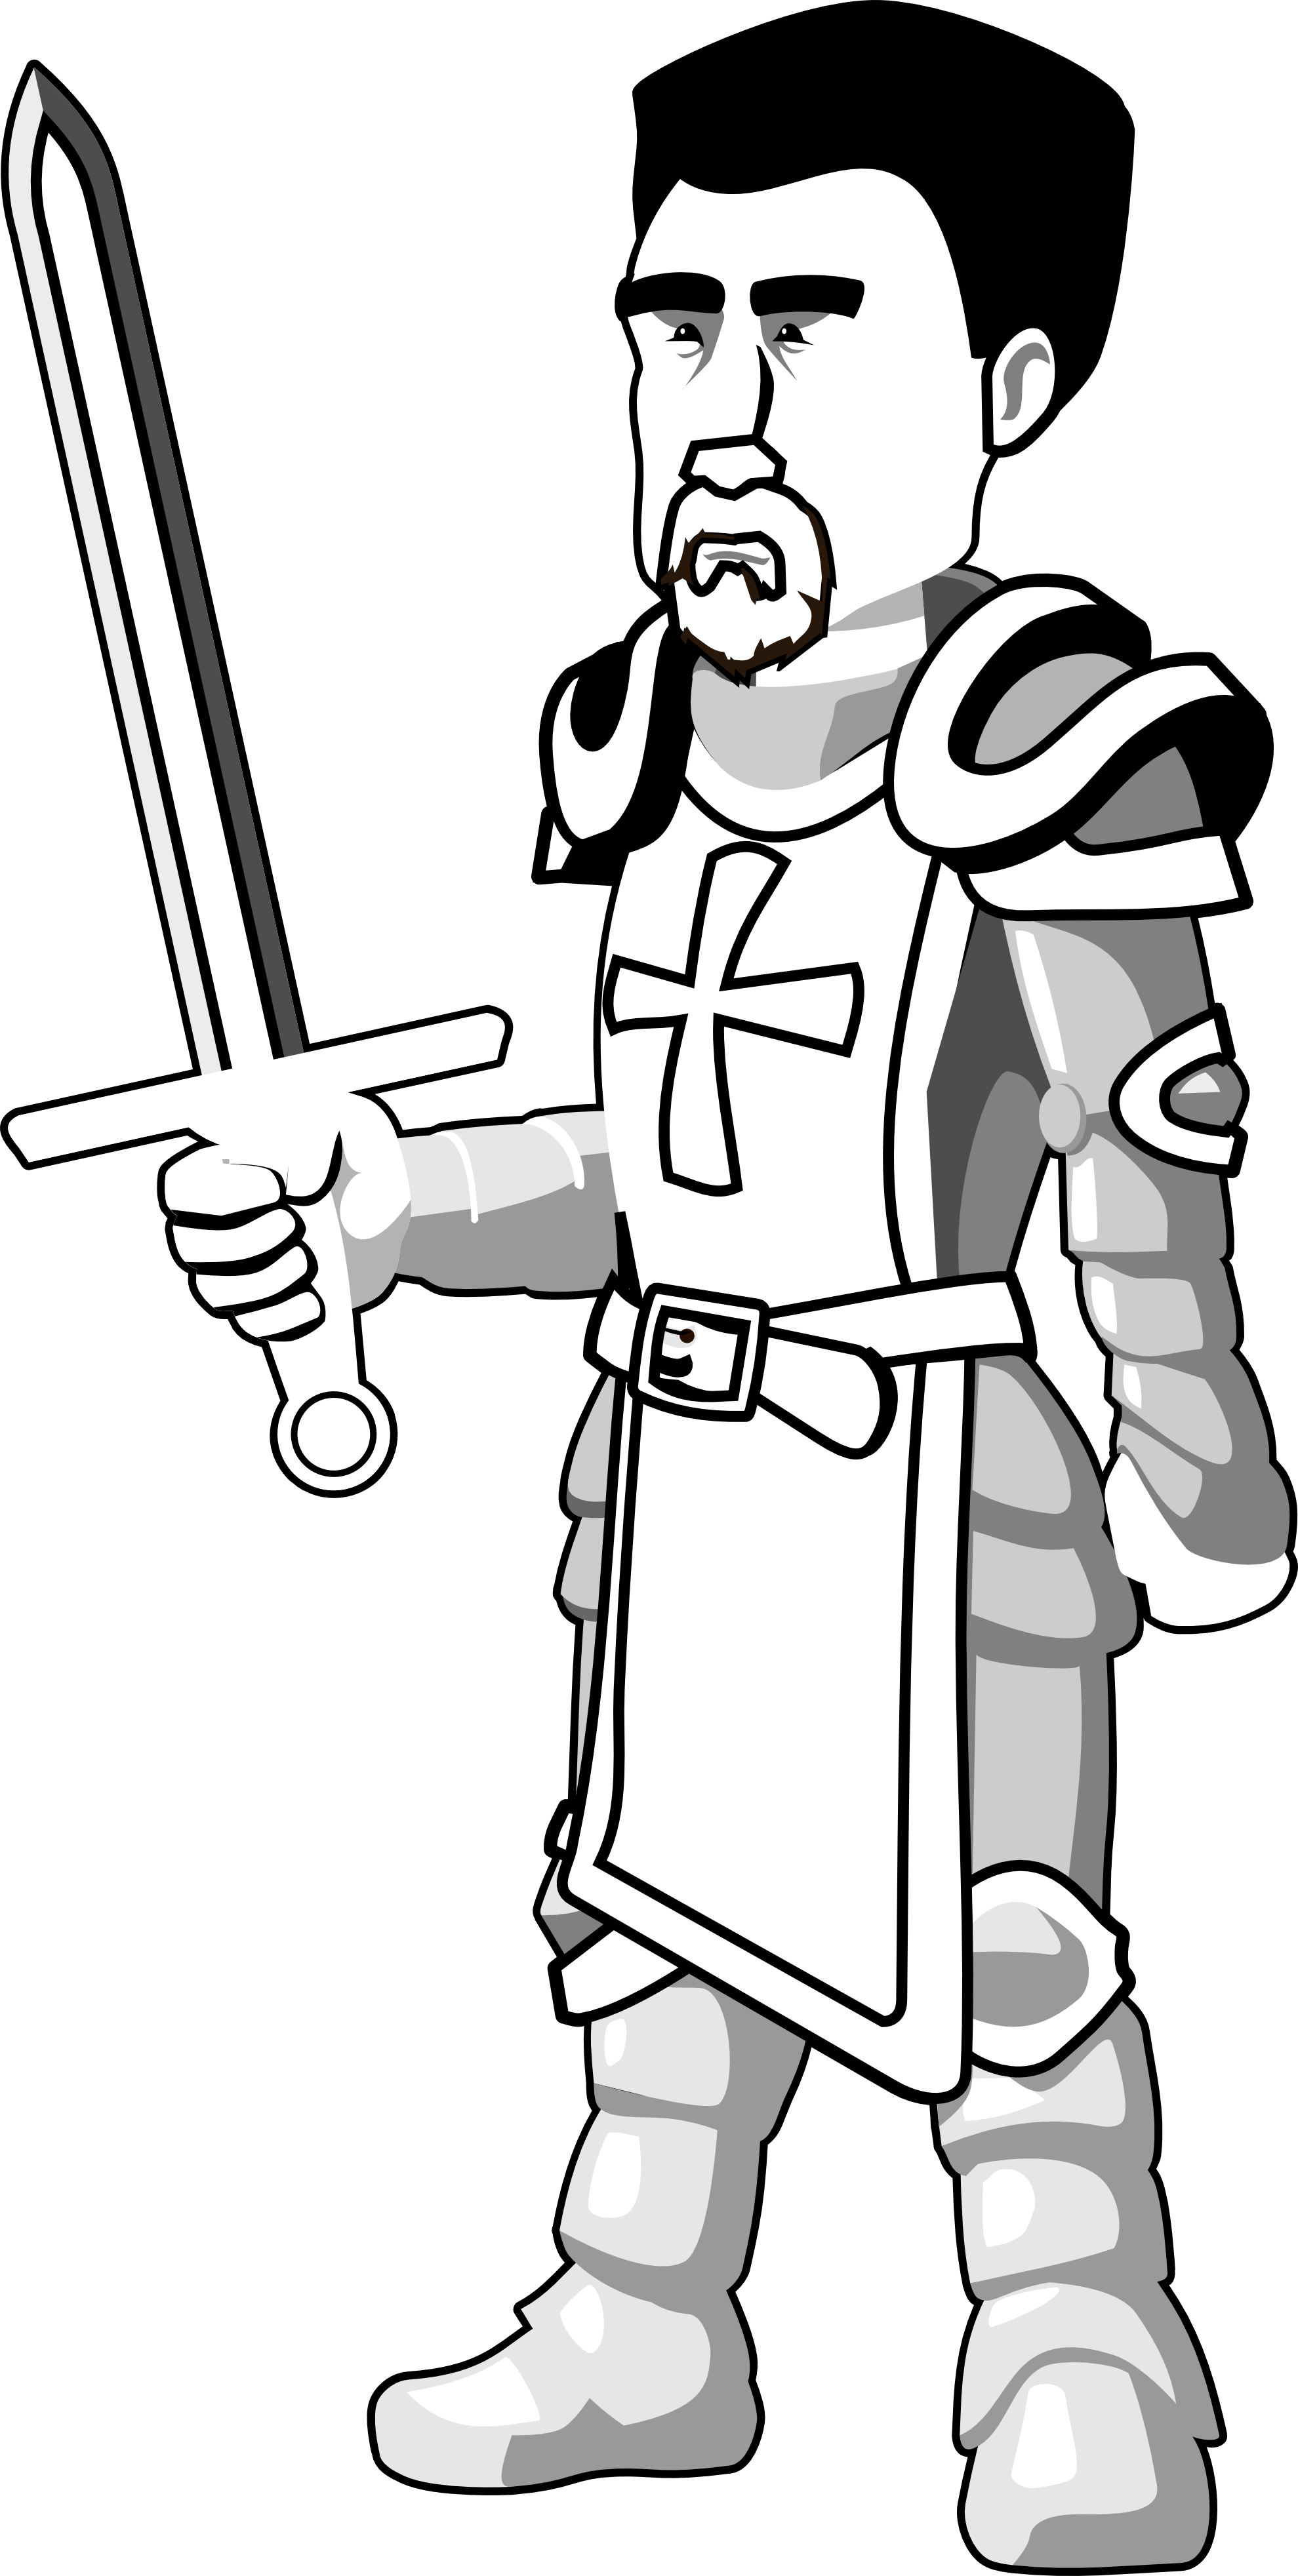 Clipart Knight & Knight Clip Art Images.